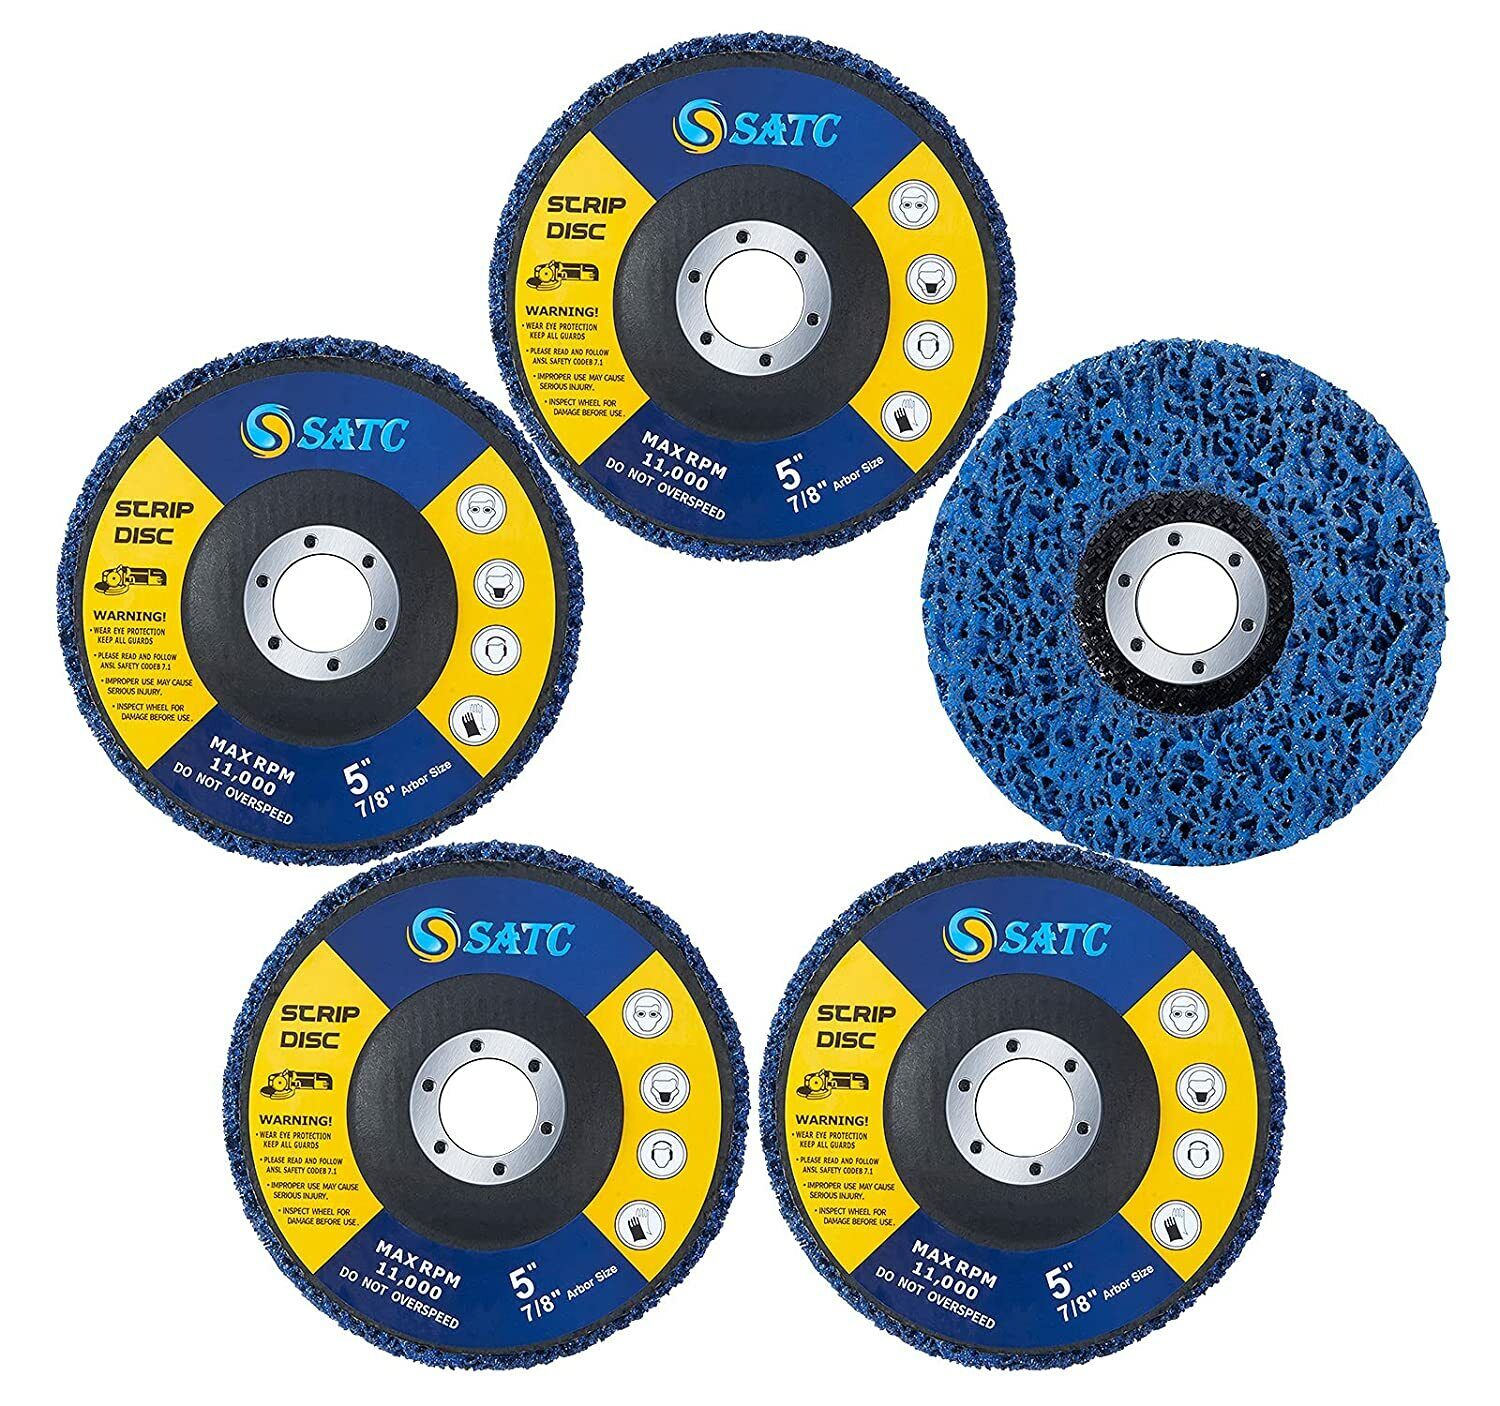 5PCS 5" x 7/8" Blue Strip Clean Disc Paint Stripping Rust Removal Sanding Wheels Satc Does not apply